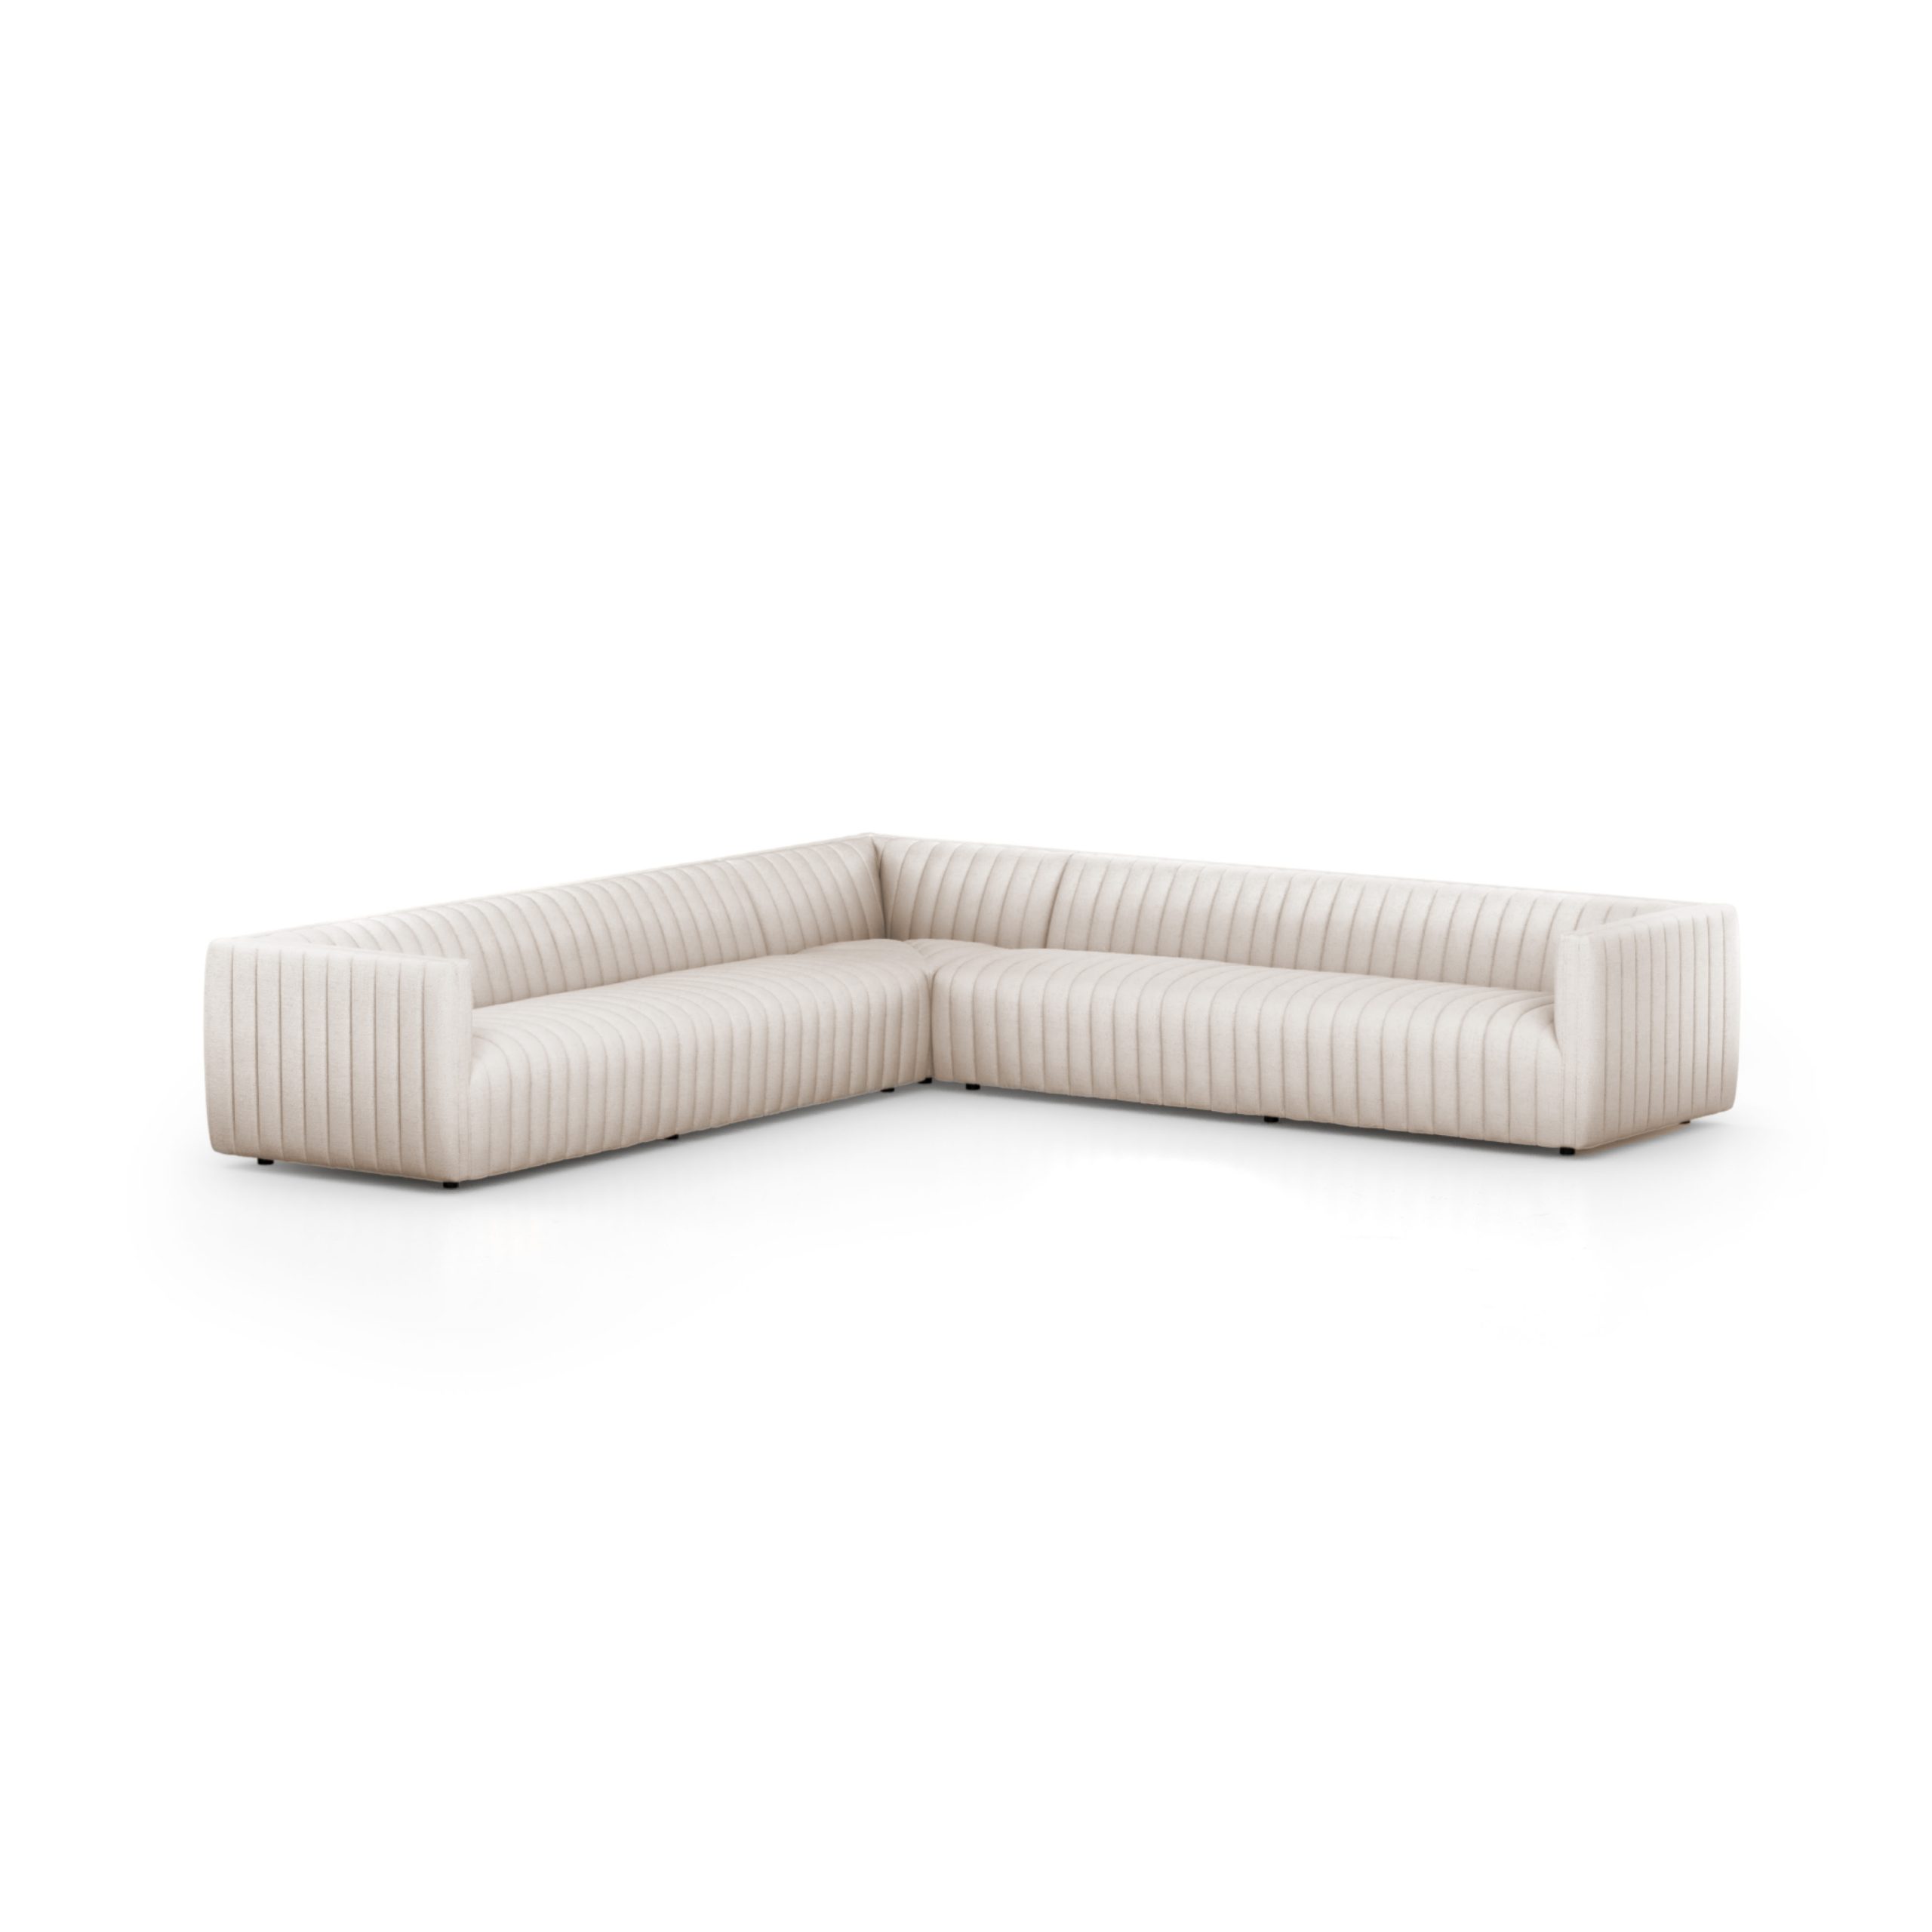 AUGUSTINE 3-PC SECTIONAL - Hedi's Furniture